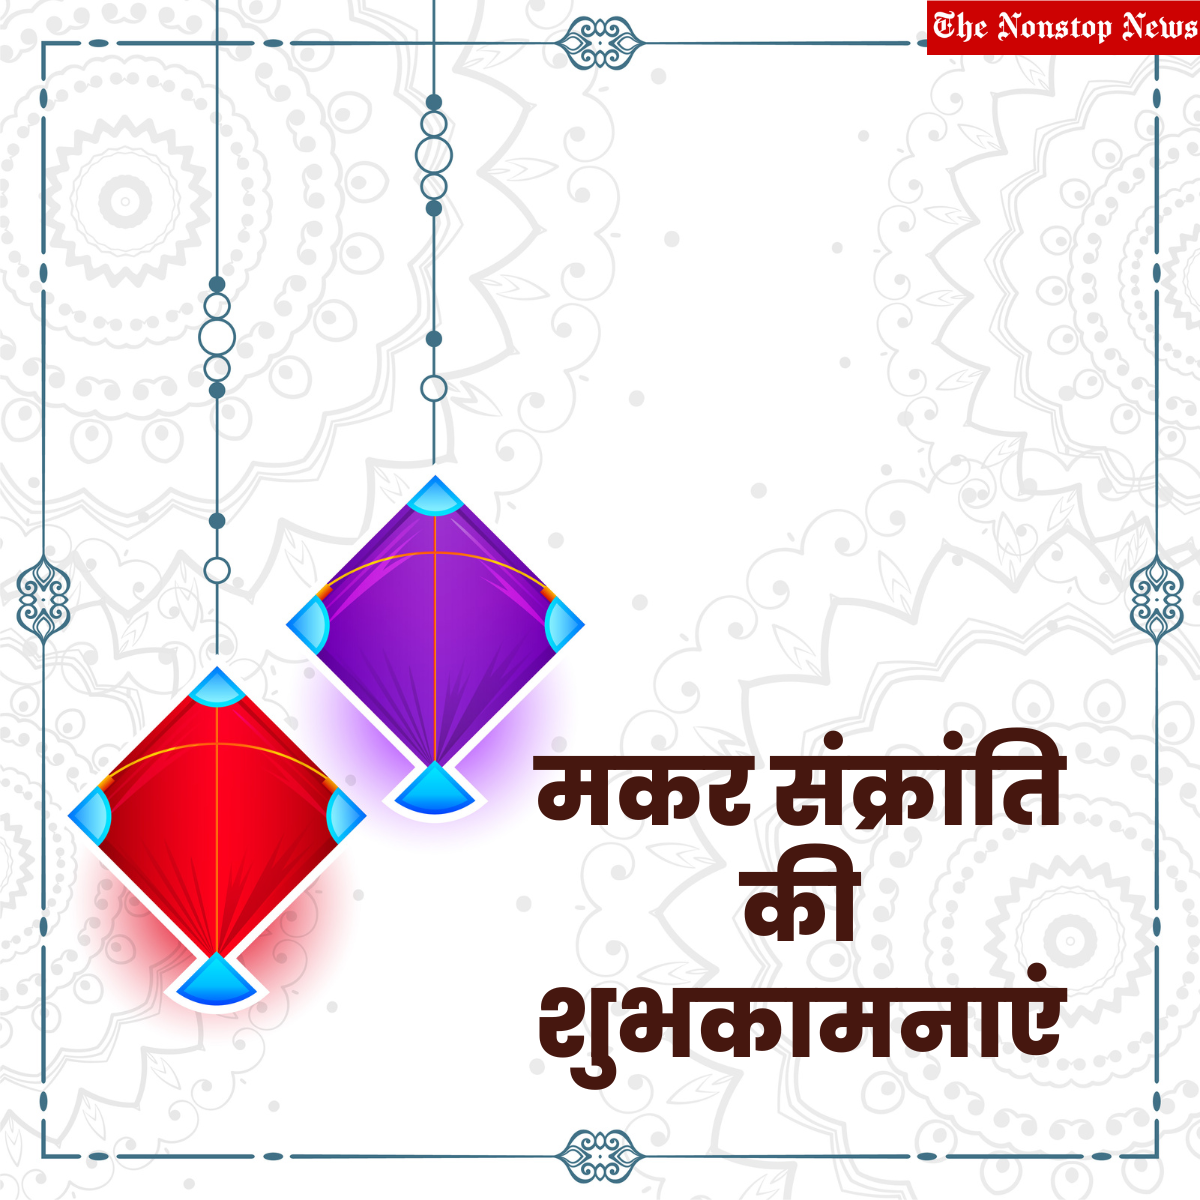 Happy Makar Sankranti 2023 Messages and Greetings in Hindi: Quotes, Images, Wishes, Shayari, and Banners to share